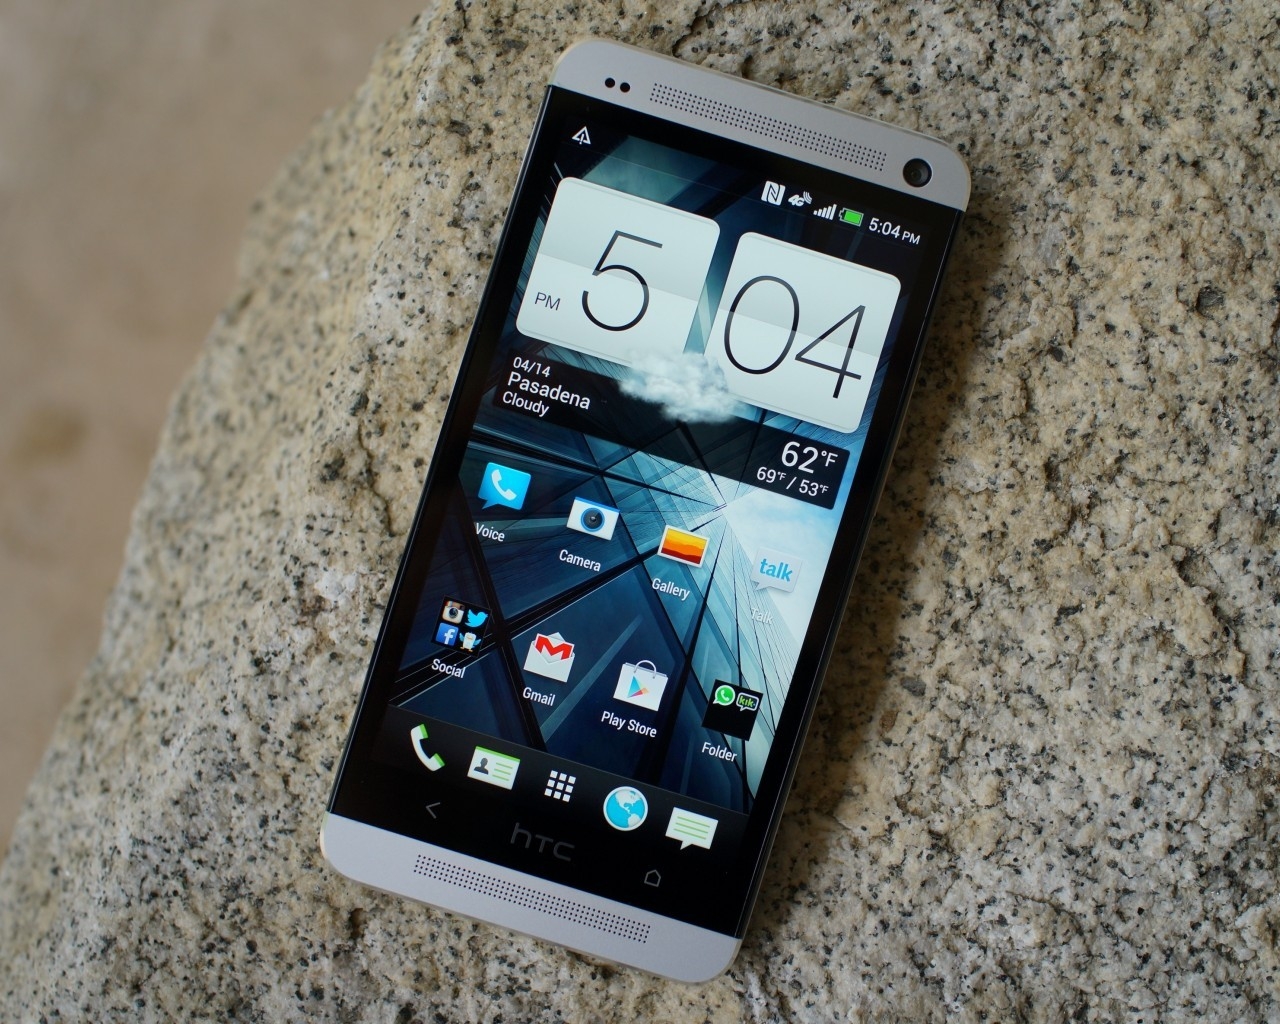 HTC One Device for 1280 x 1024 resolution